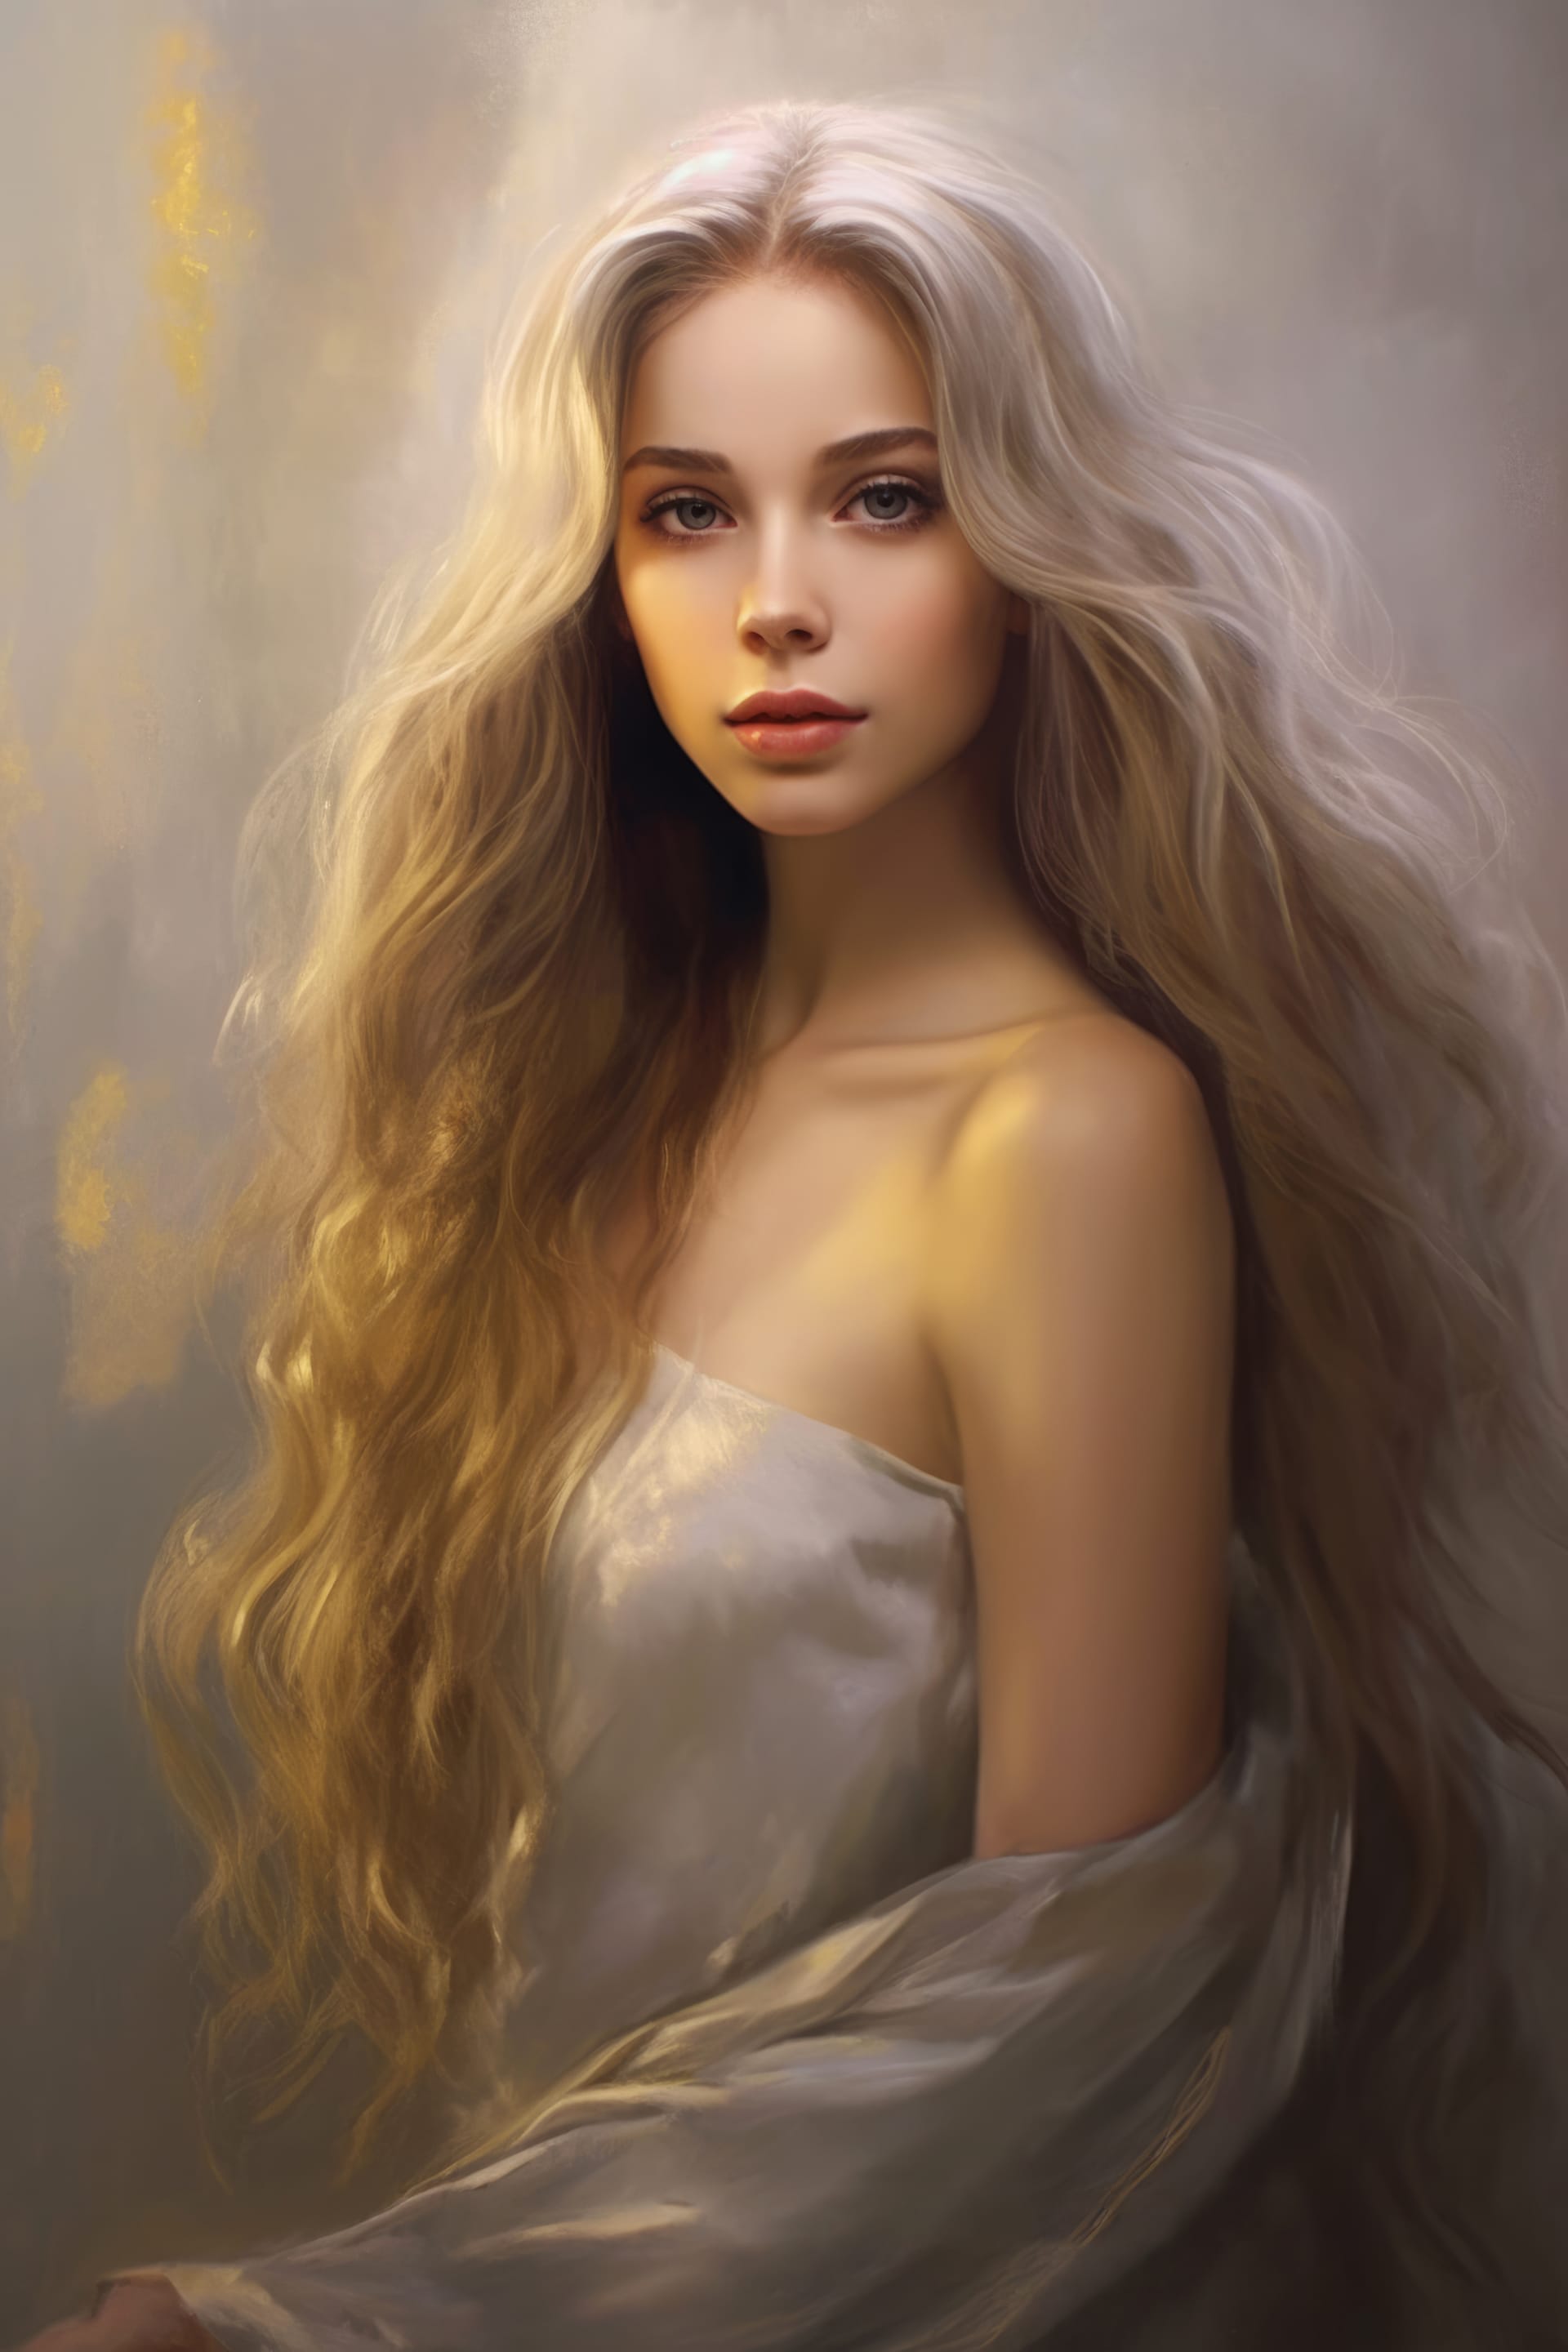 Bright portrait girl with long hair standing